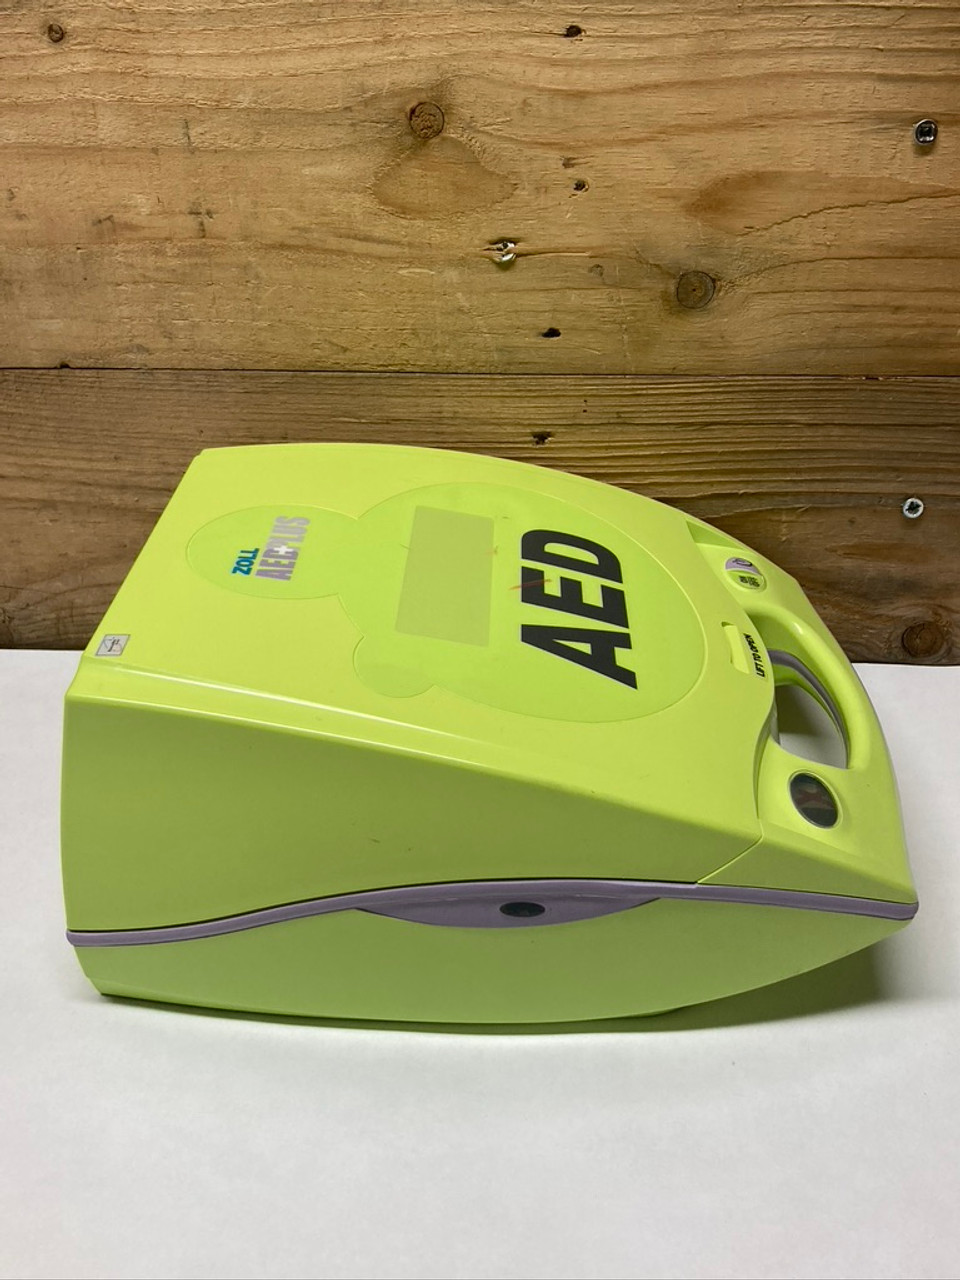 Zoll AED Plus Fully Automatic Defibrillator